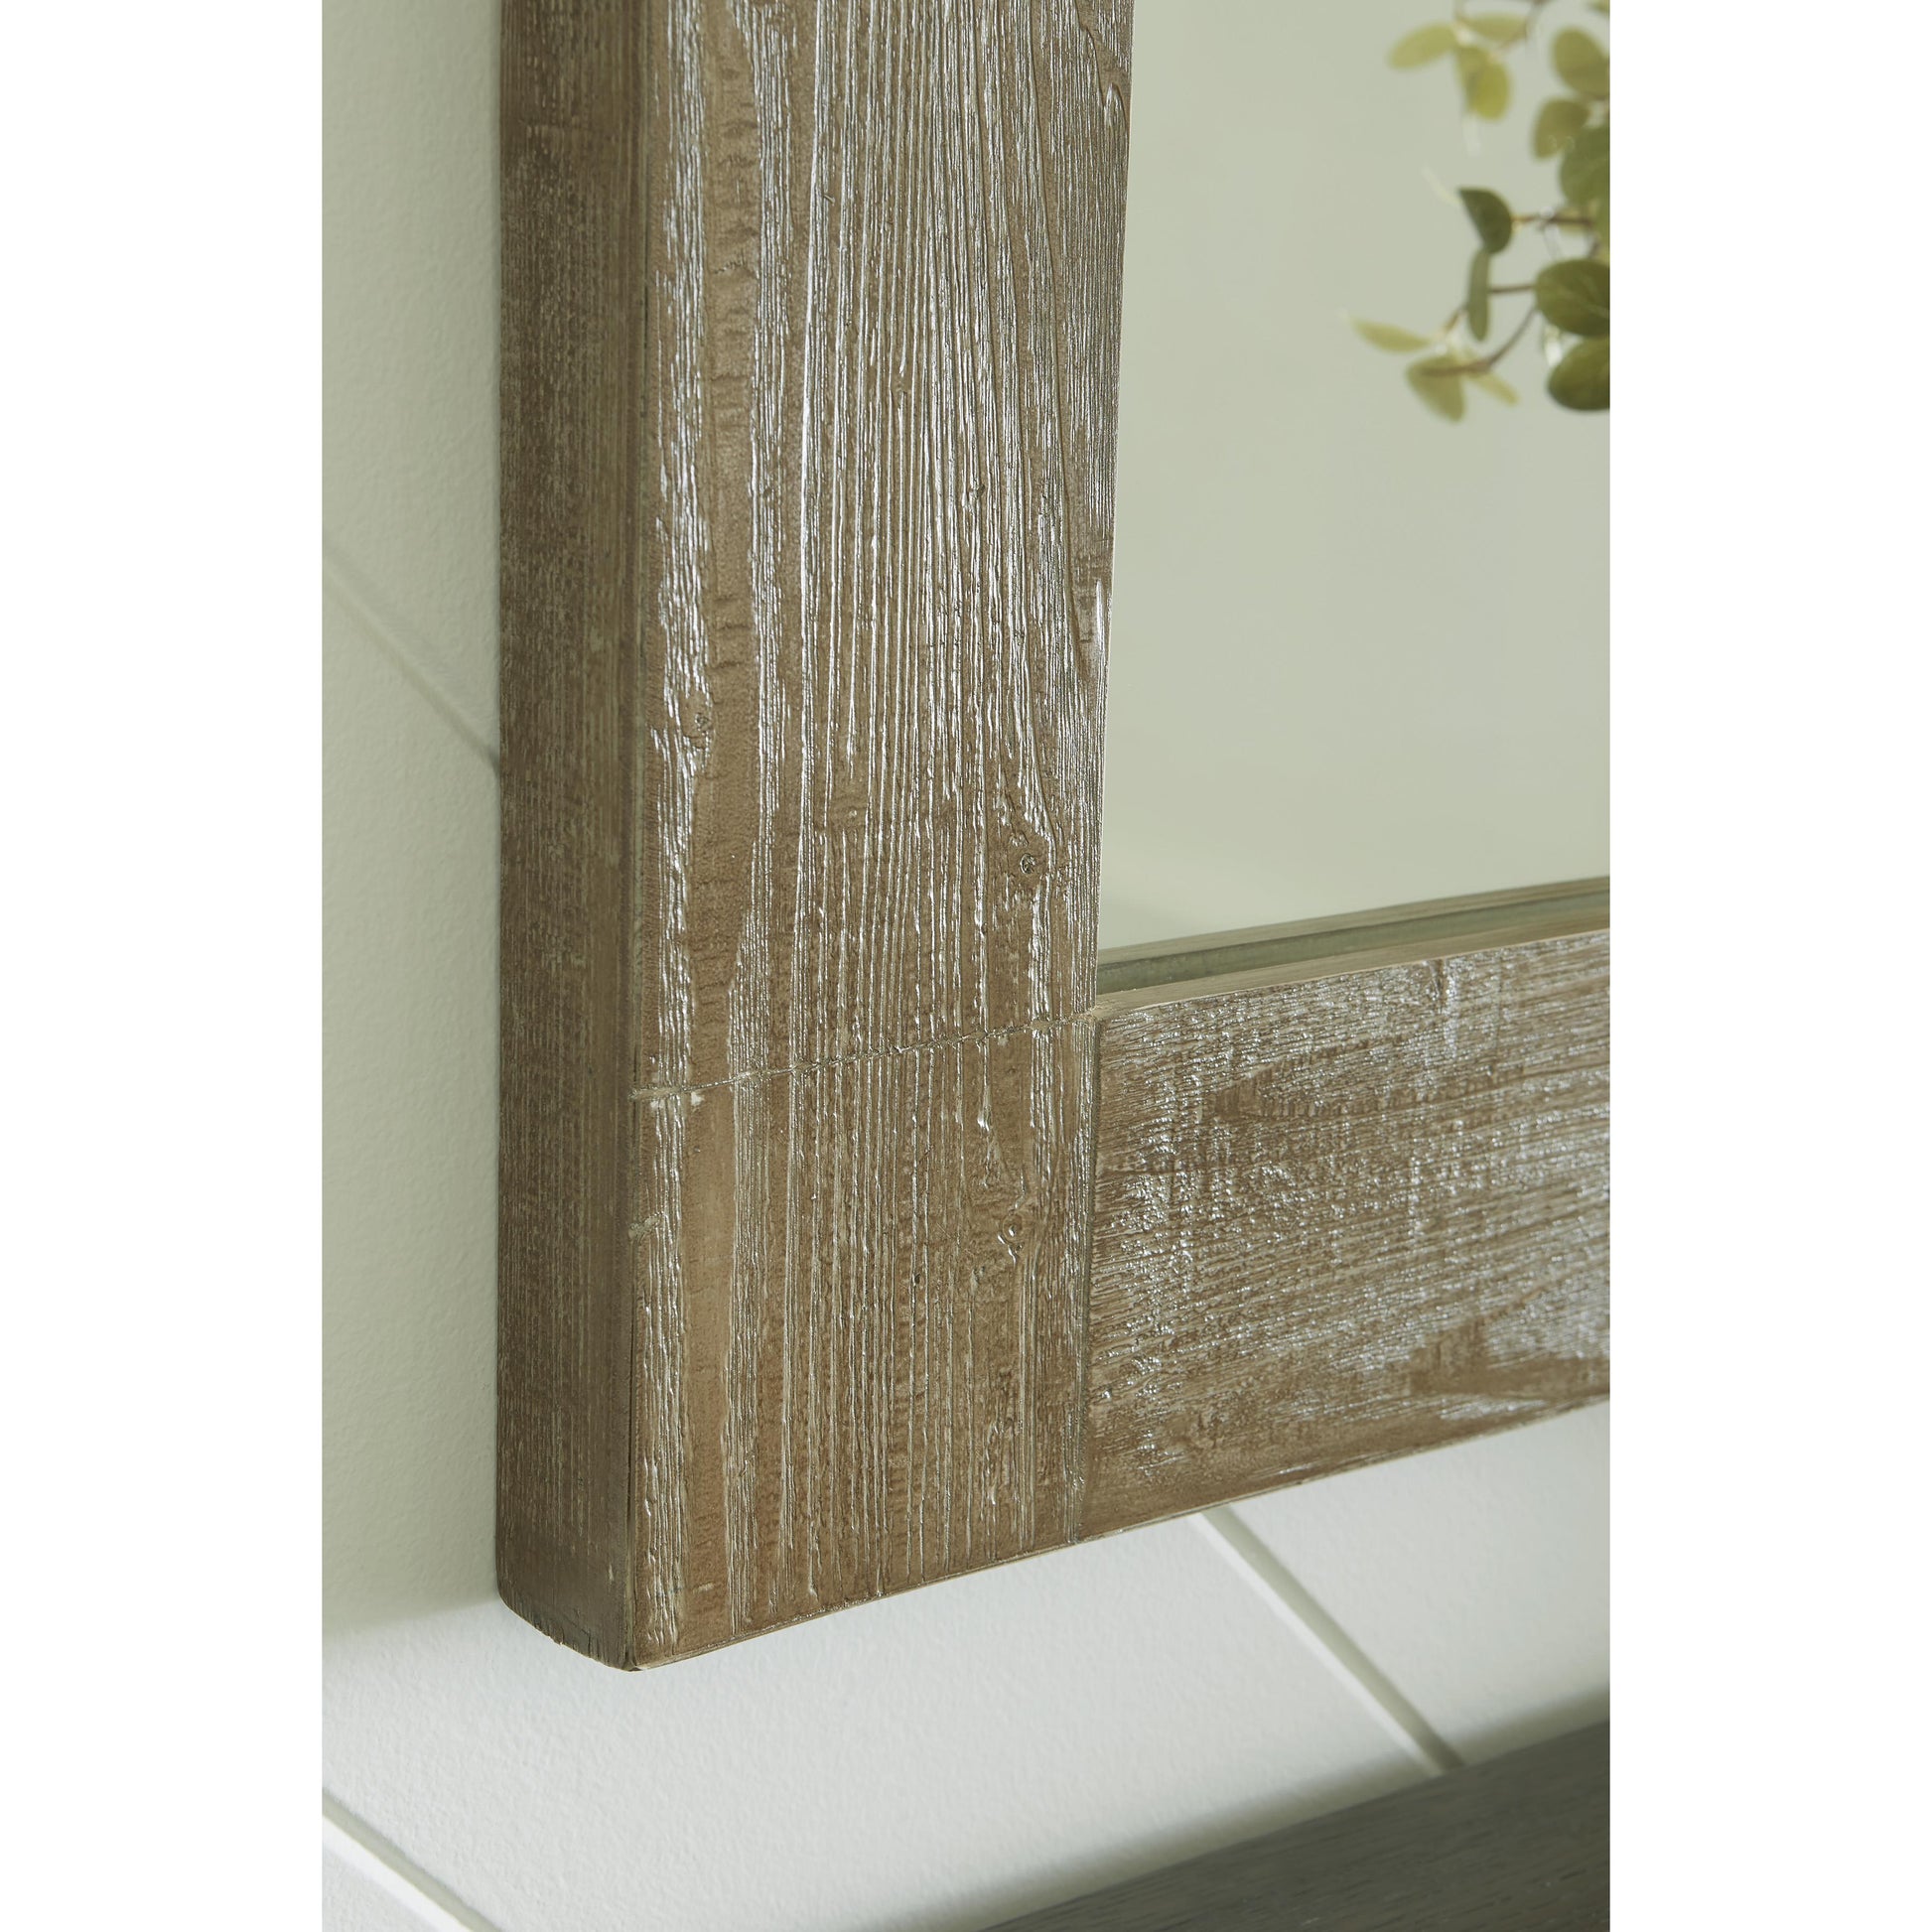 Signature Design by Ashley Waltleigh Wall Mirror A8010277 IMAGE 5